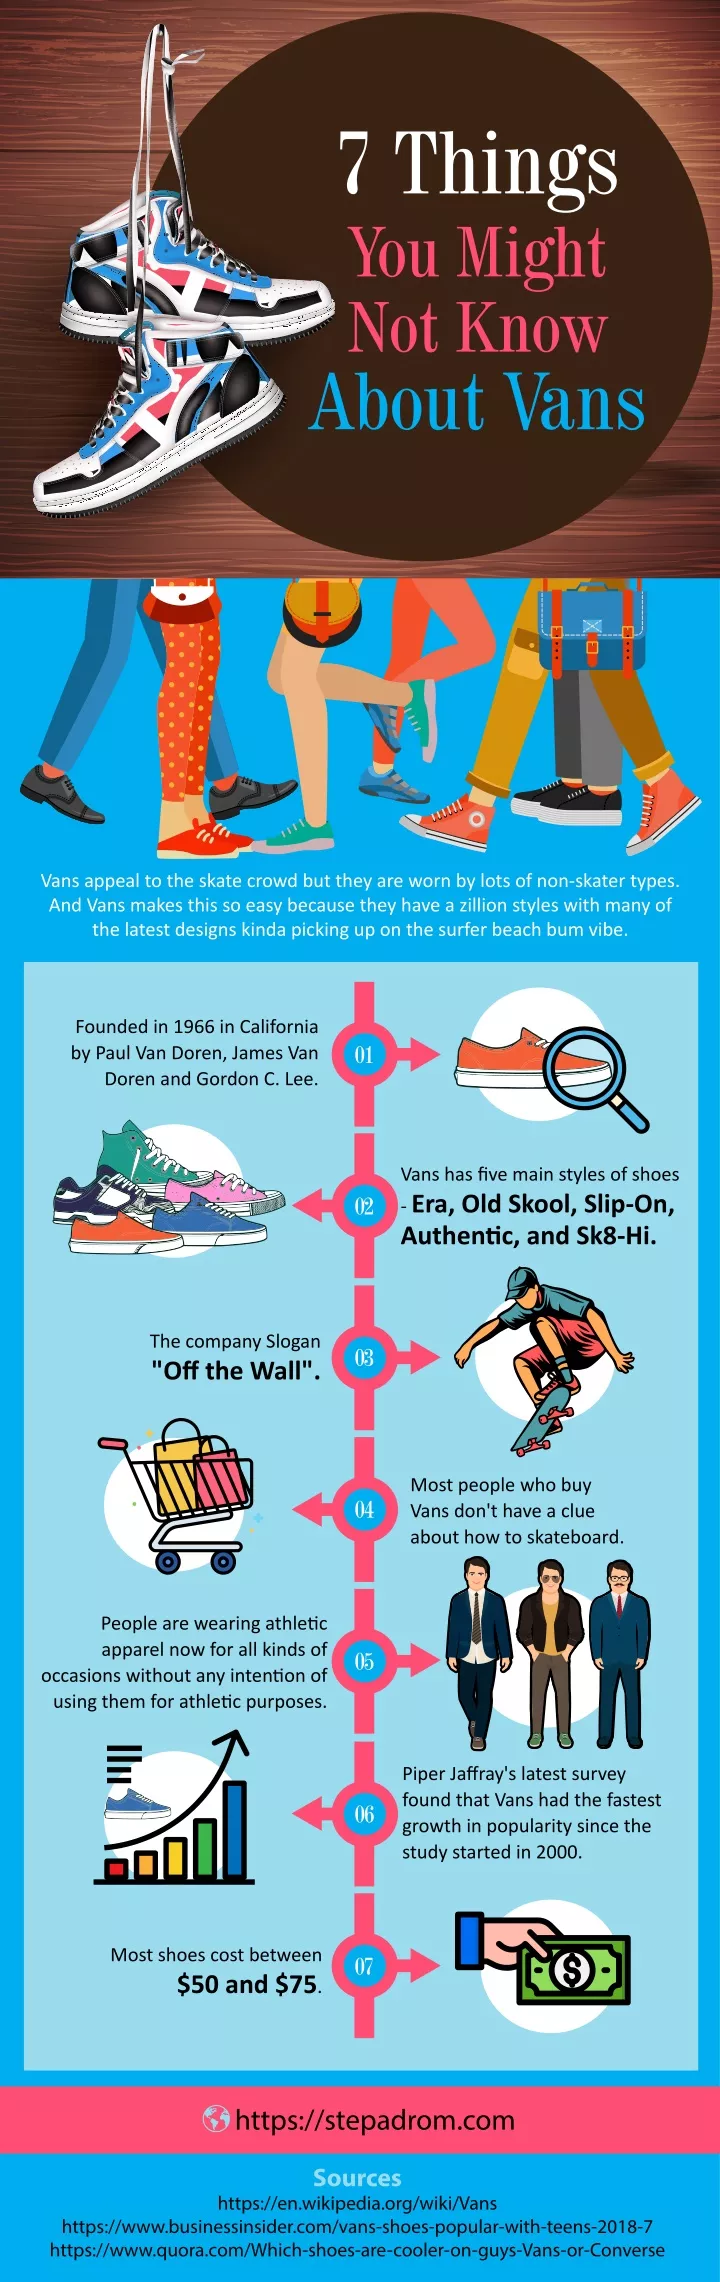 7 things you might not know about vans